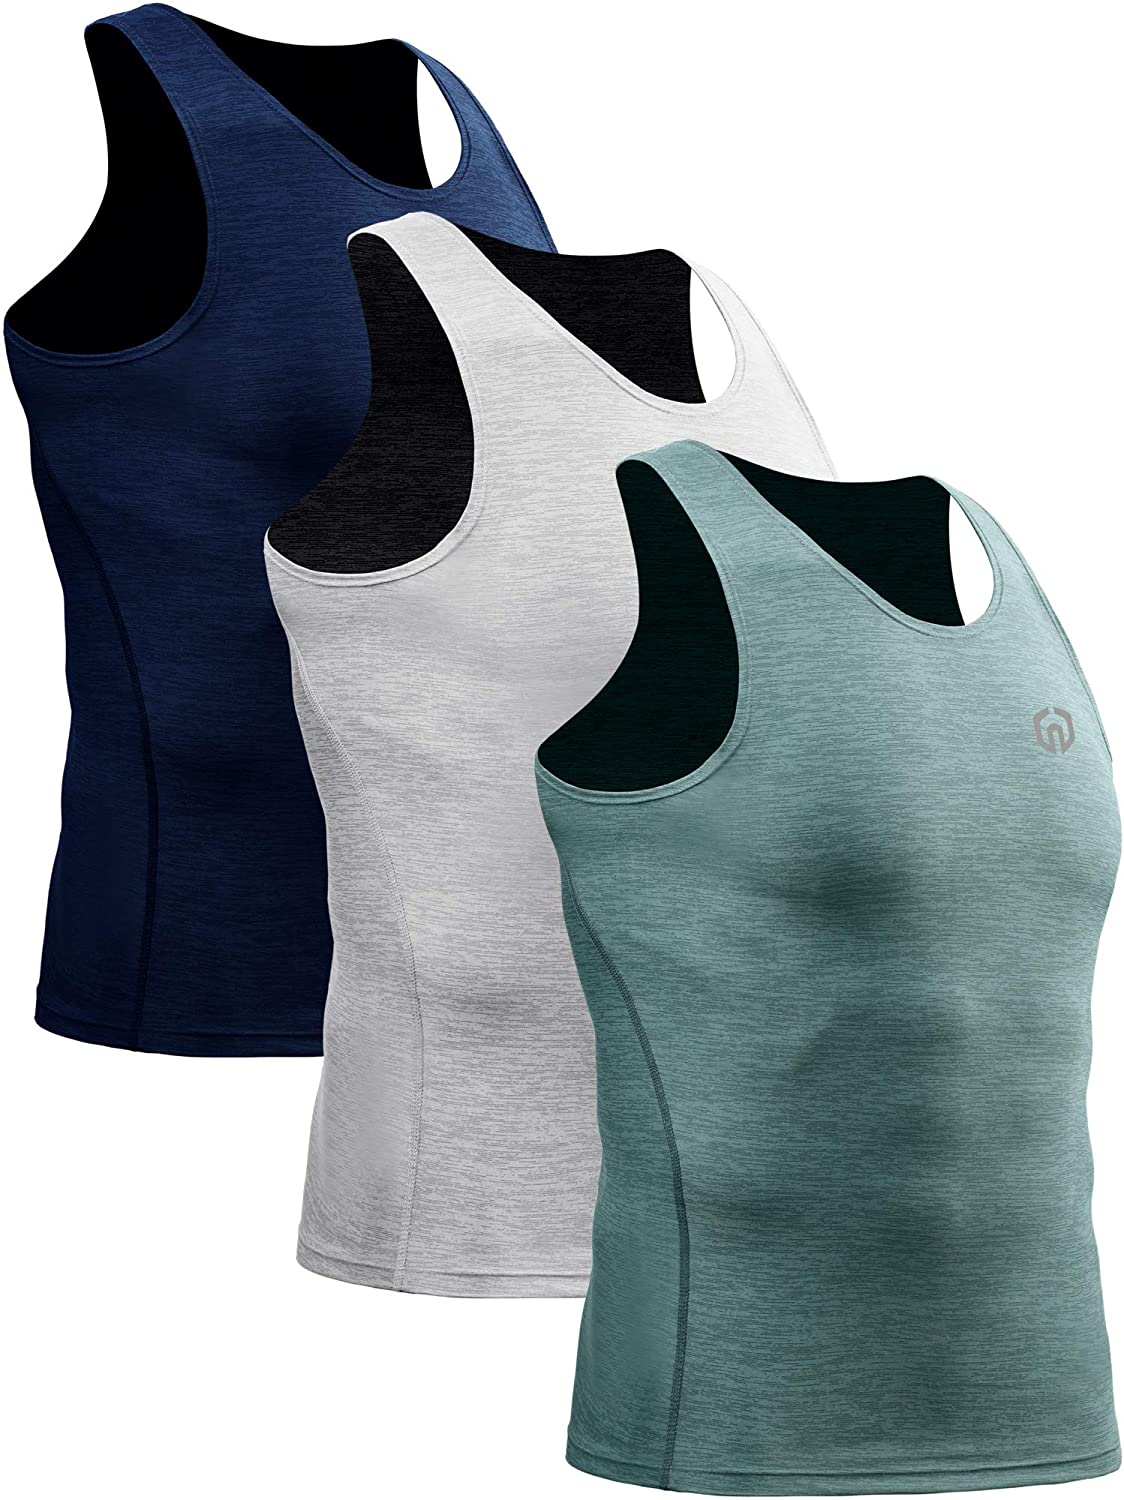 Neleus Mens 3 Pack Athletic Compression Under Base Layer Sport Tank Top NDT0001